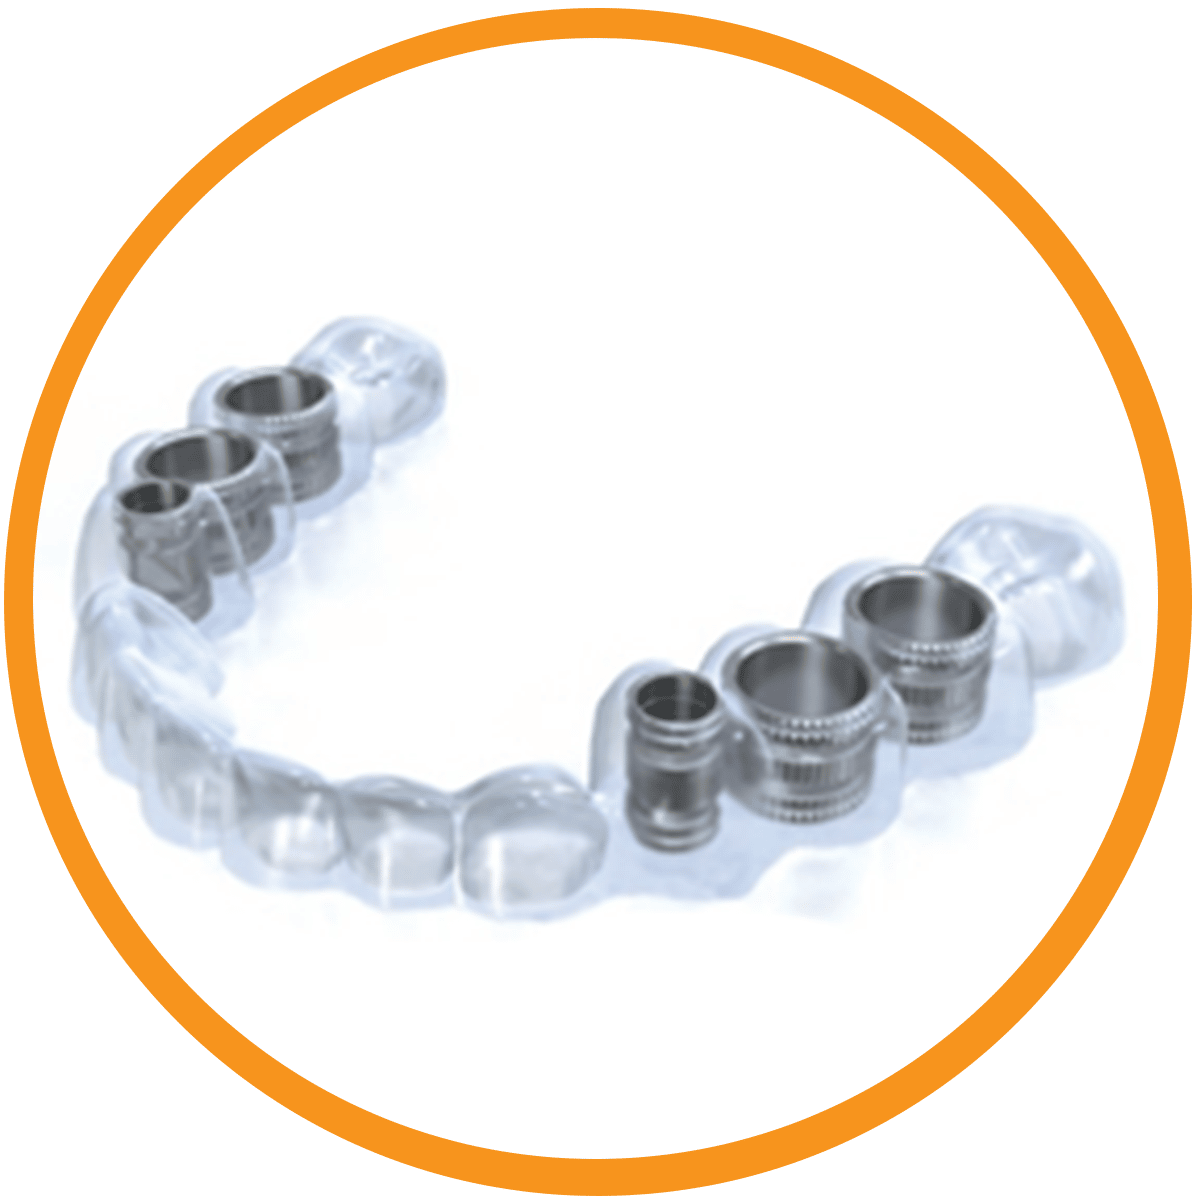 accuguide surgical guide for dental implant placement